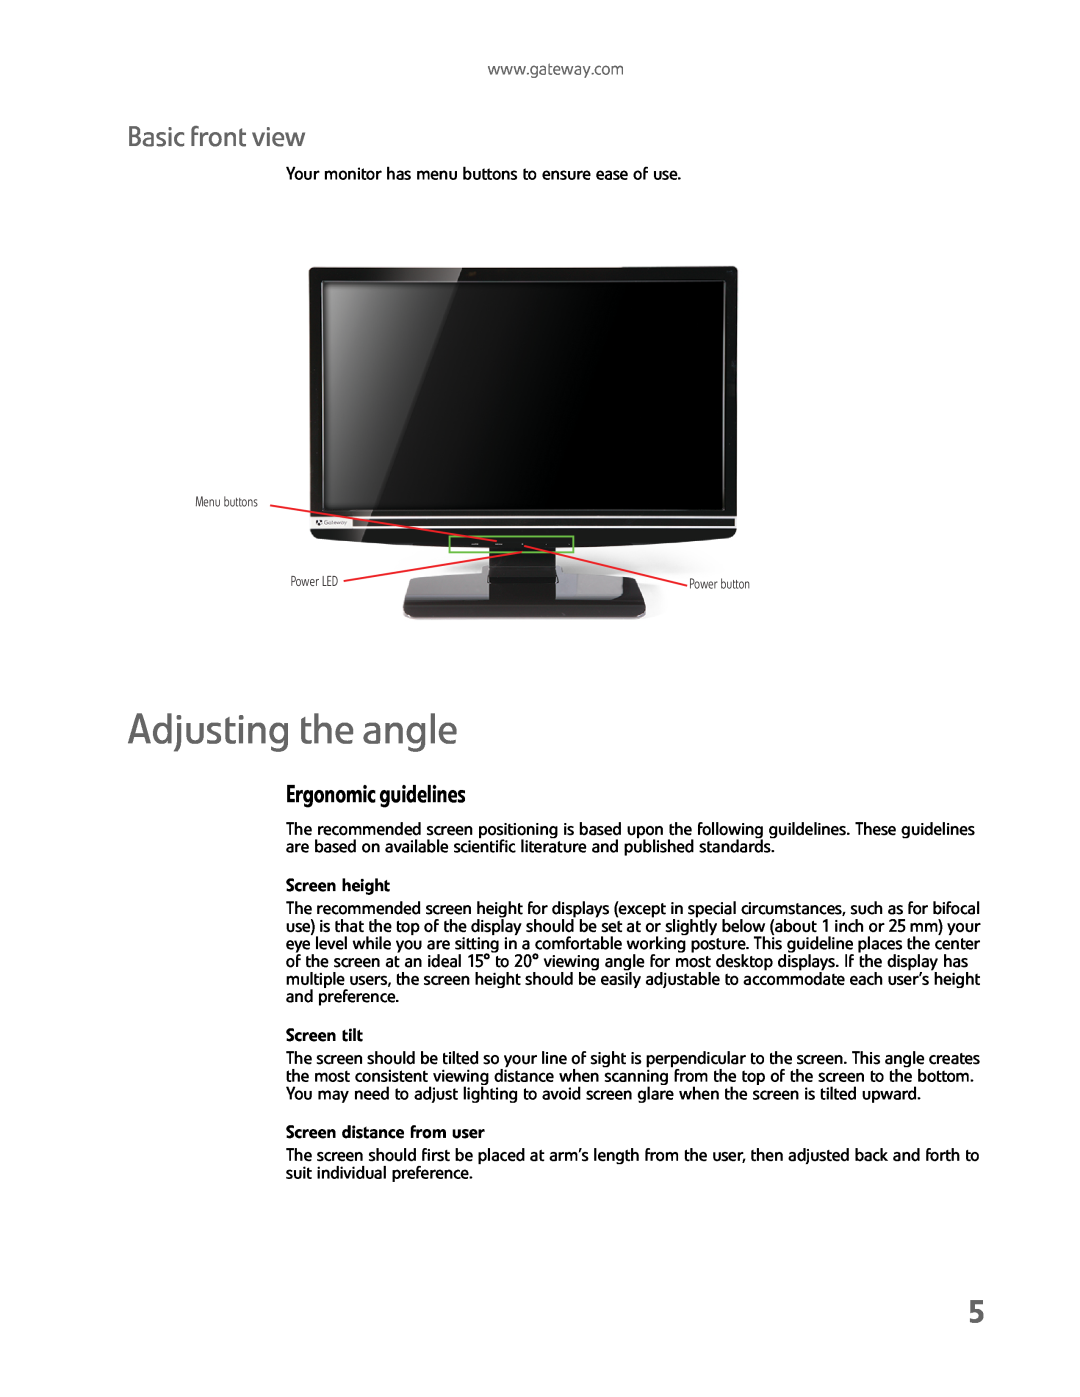 Gateway HX2000 manual Adjusting the angle, Basic front view, Ergonomic guidelines 